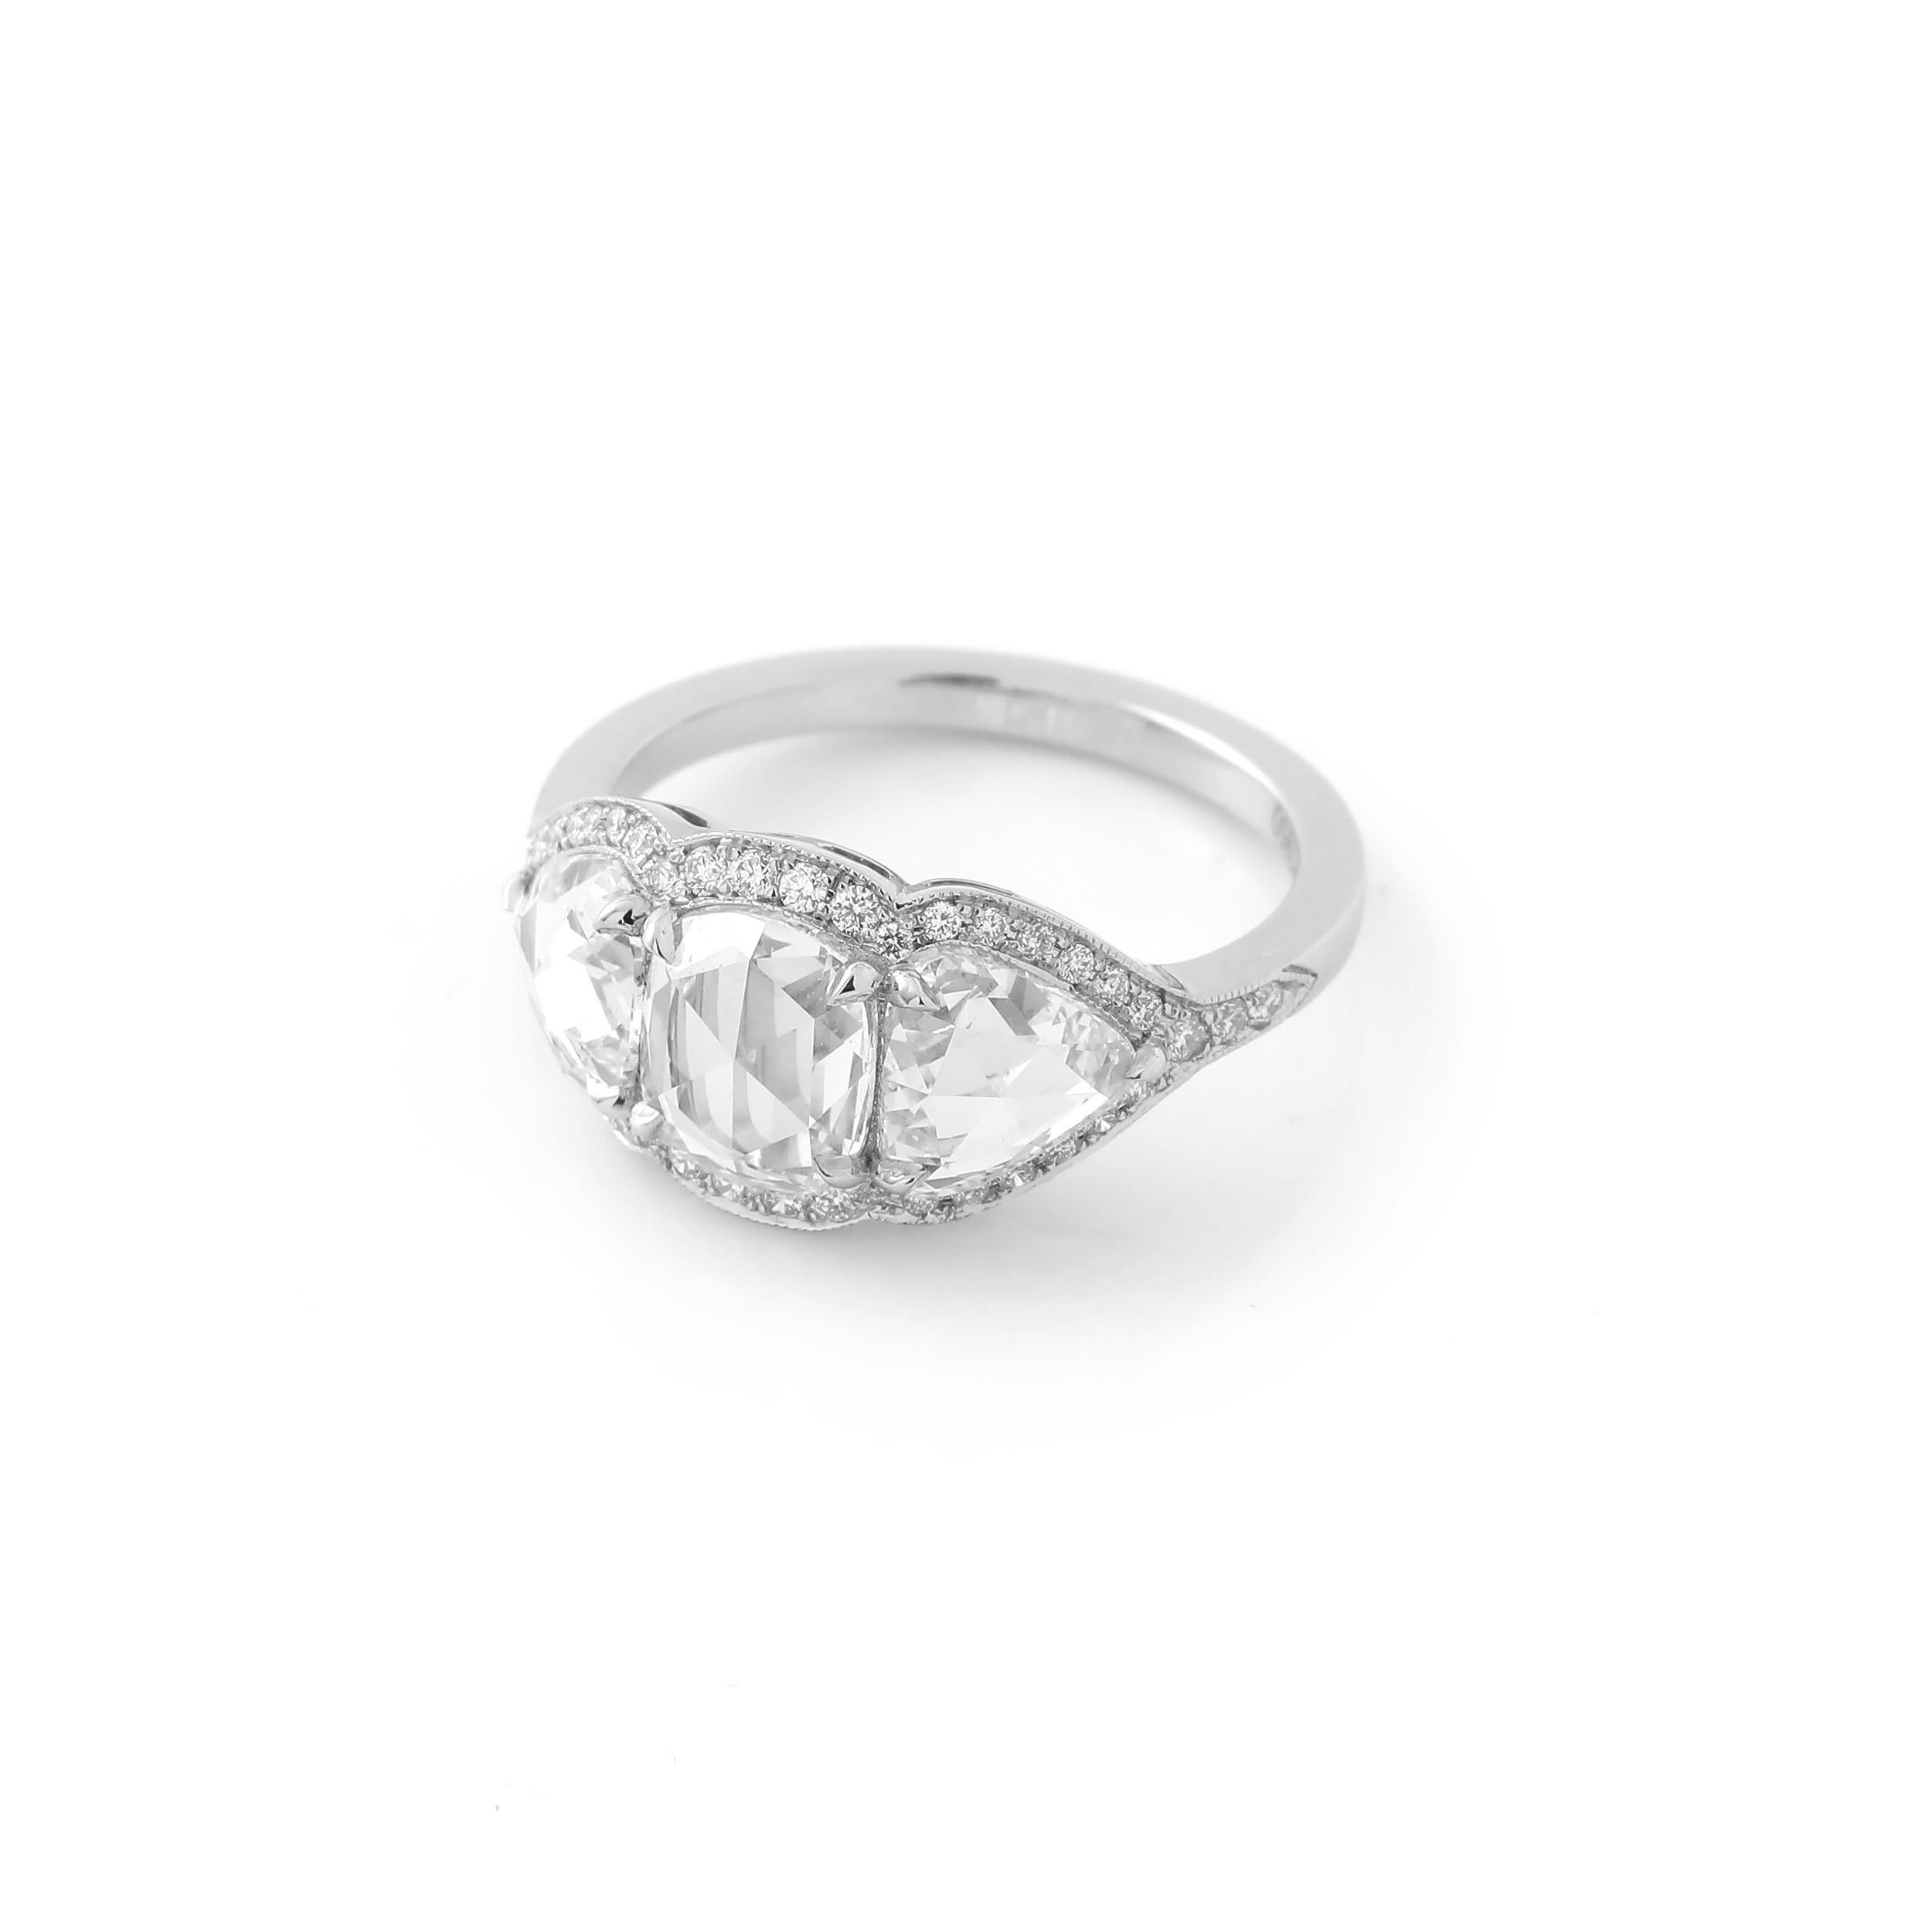 This ring features a 1.12 carat rose cut cushion diamond at its center, and a pair of beautifully matched rose cut pear shapes weighing 1.59 carats as side stones. The diamonds are not certified, but are 100% natural and approximately F to G color